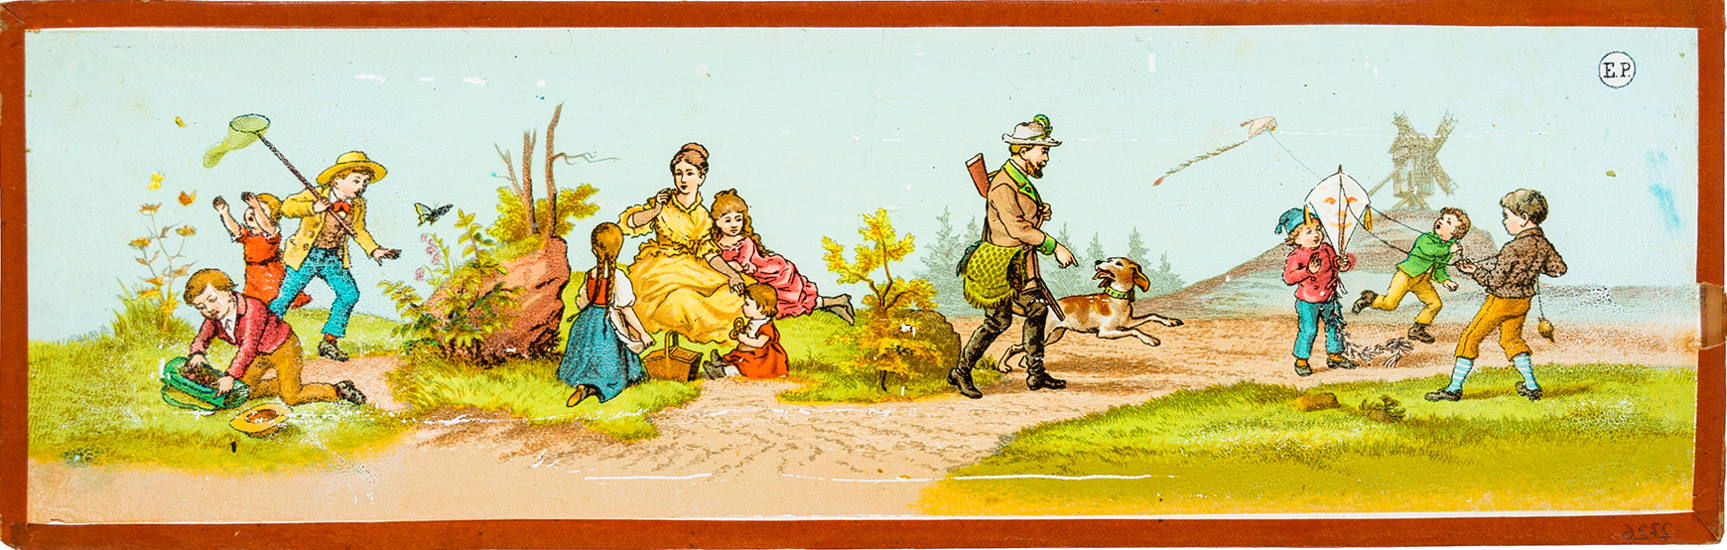 Children, woman and man in the country